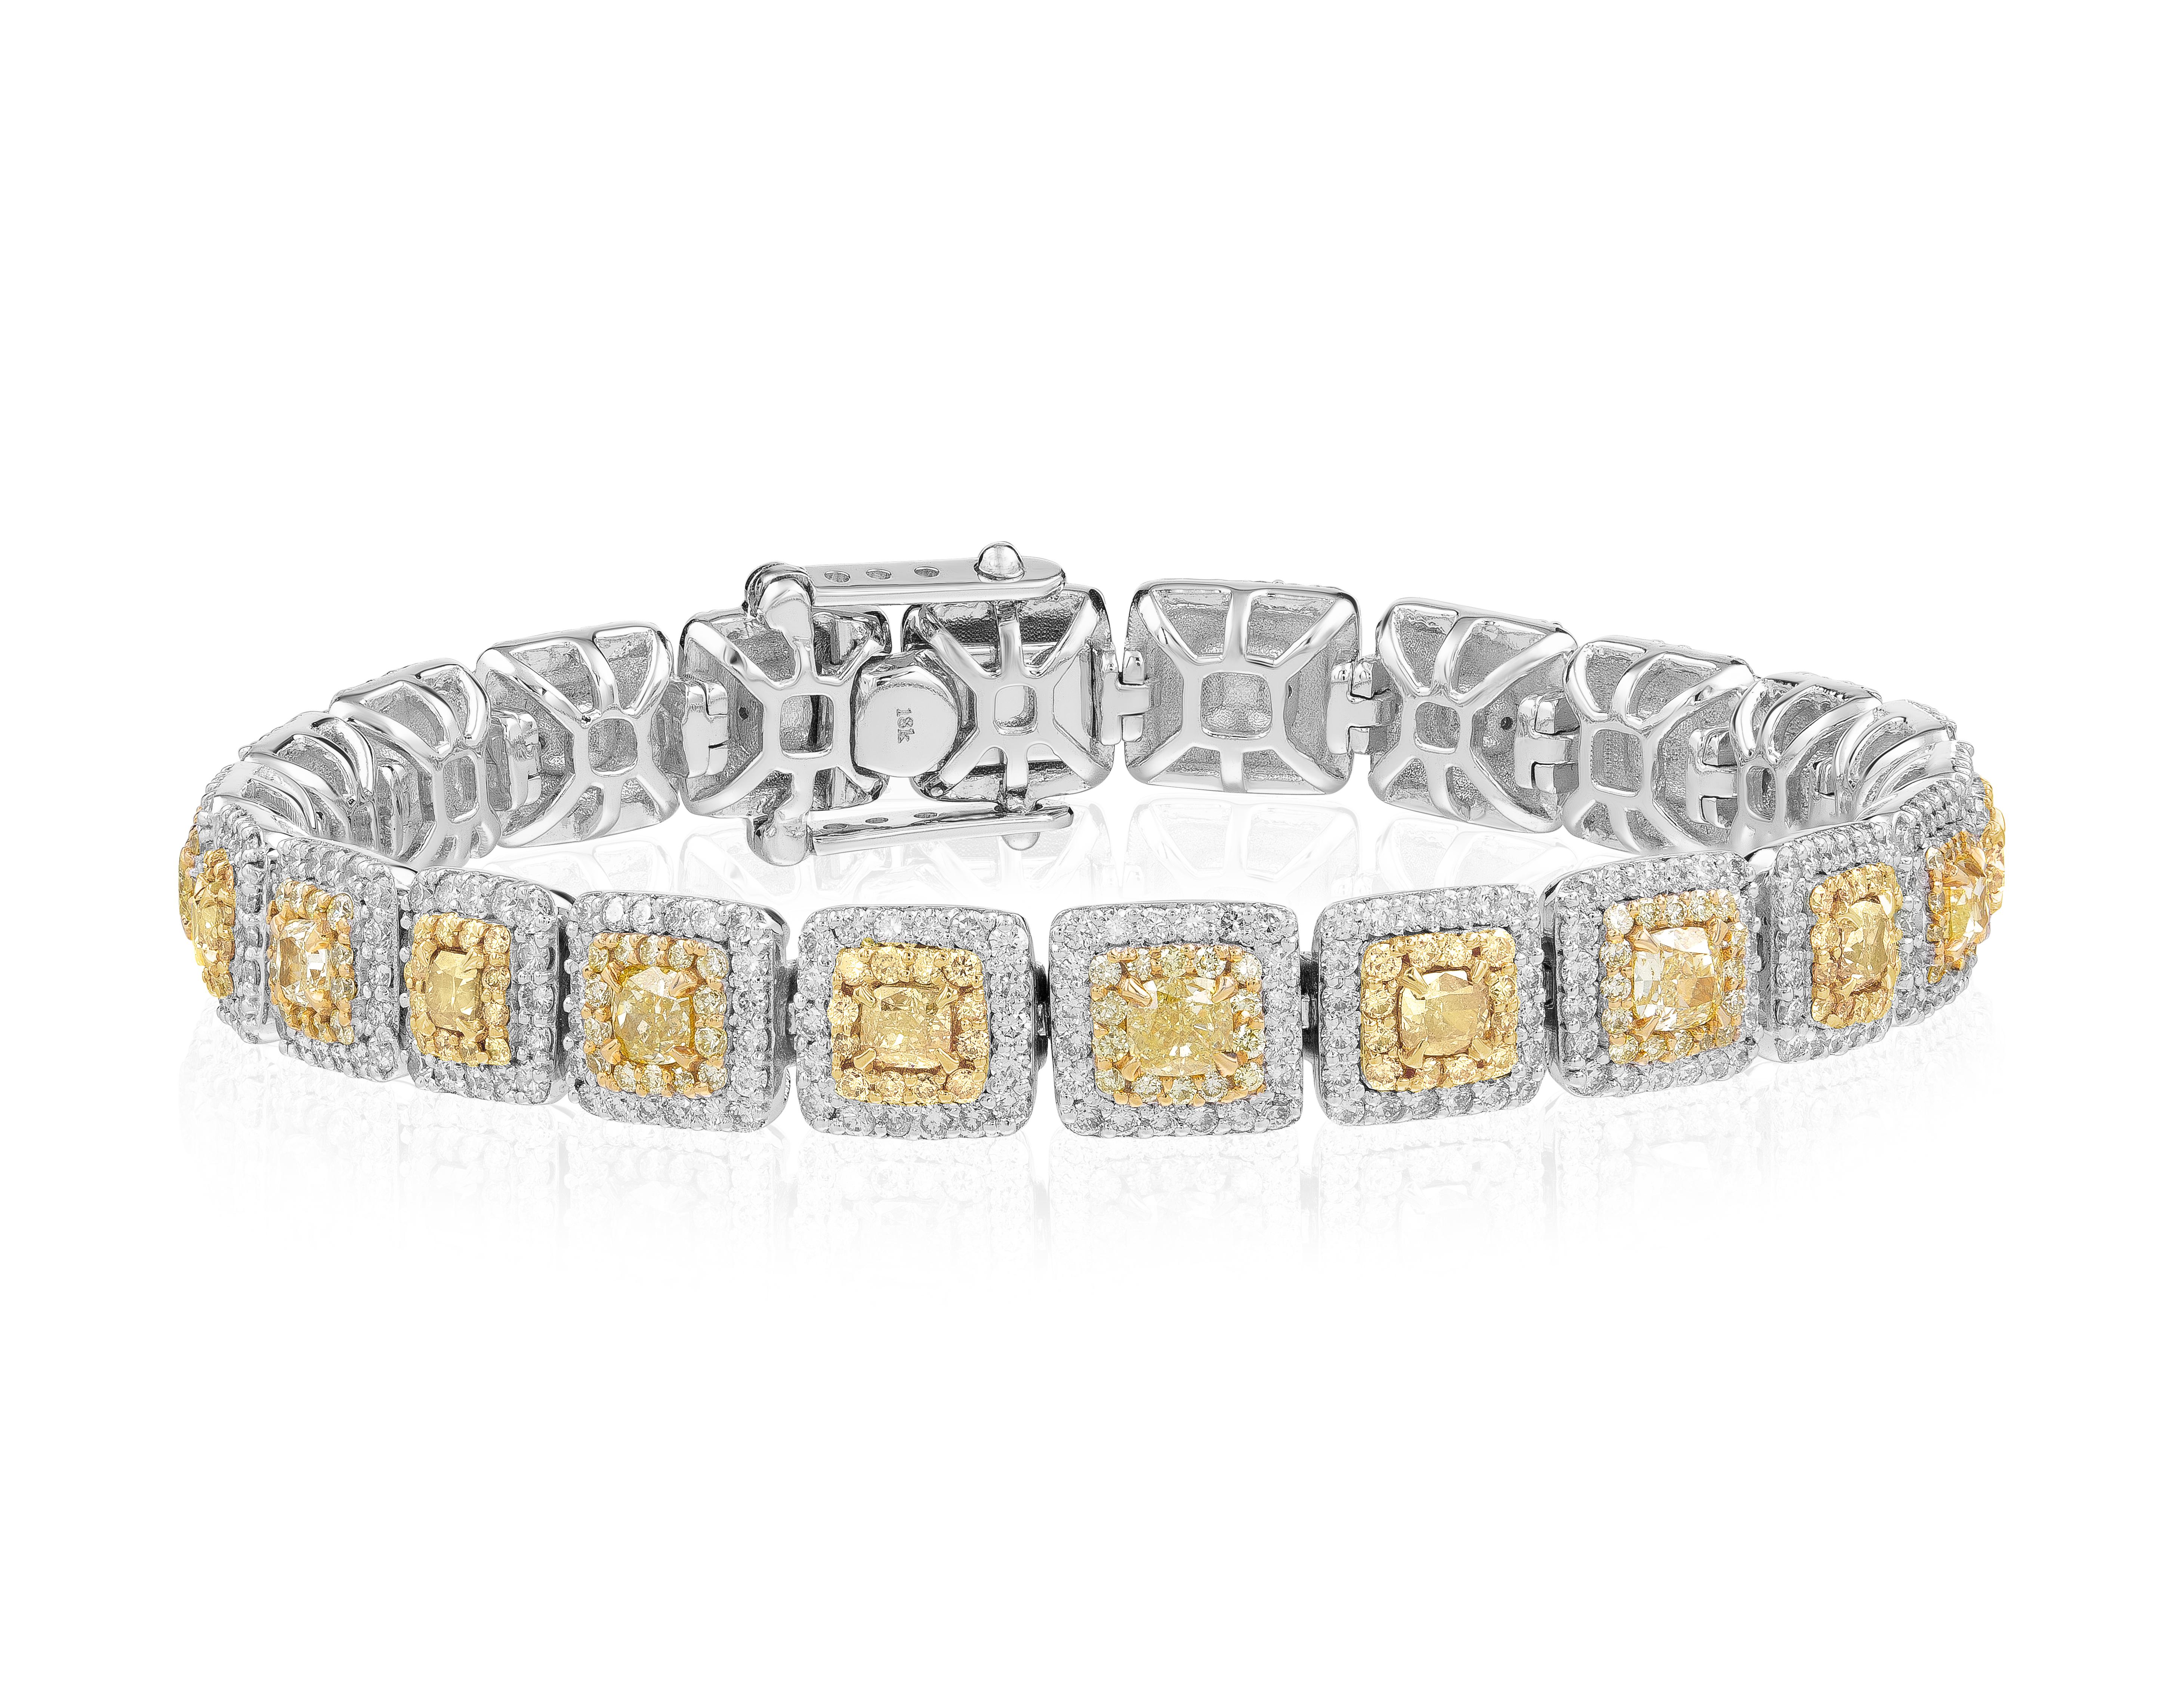 Indulge in the allure of our exquisite fancy yellow diamond bracelet, a truly unique and captivating piece of jewelry. This bracelet features 21 stunning center diamonds, each weighing approximately 4.36 carats, showcasing their vibrant and